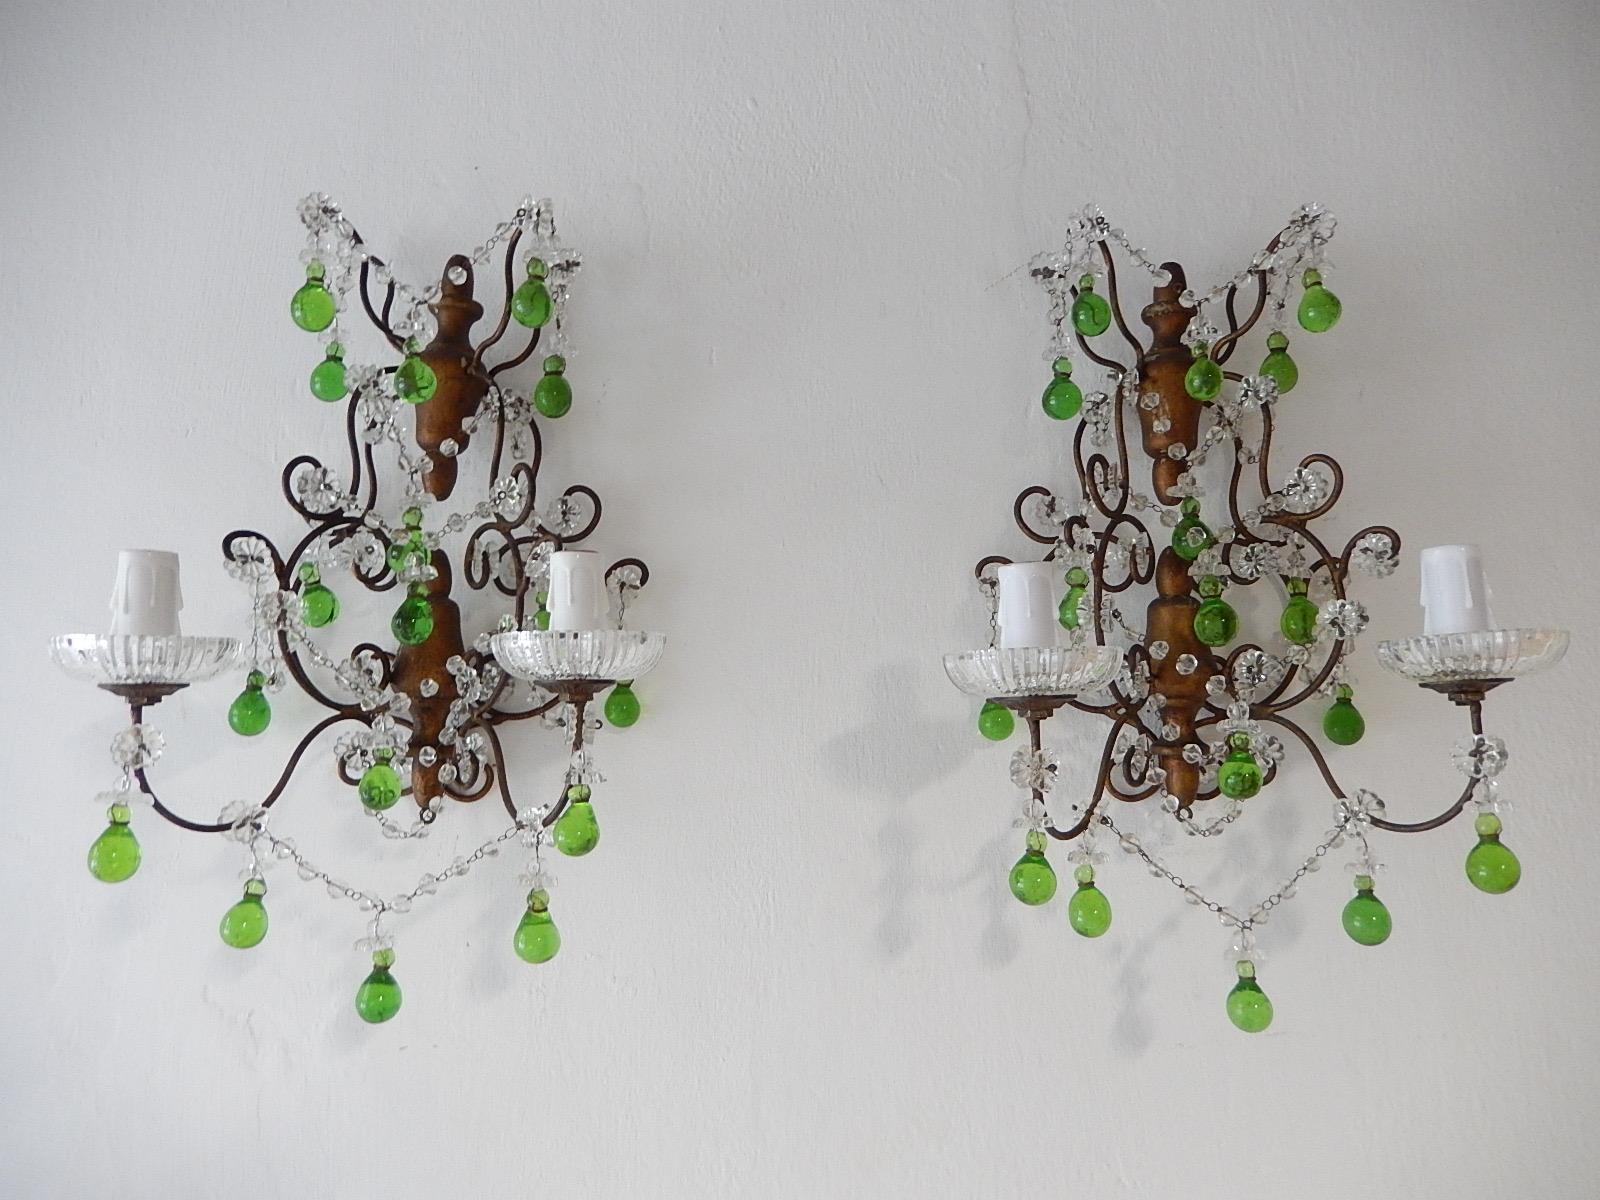 Will be rewired with certified US UL sockets for USA and appropriate sockets for all other countries and ready to hang. One of a kind pair! Housing 2 lights each, sitting in rare crystal bobéches dripping with vintage crystal prisms. Swags of